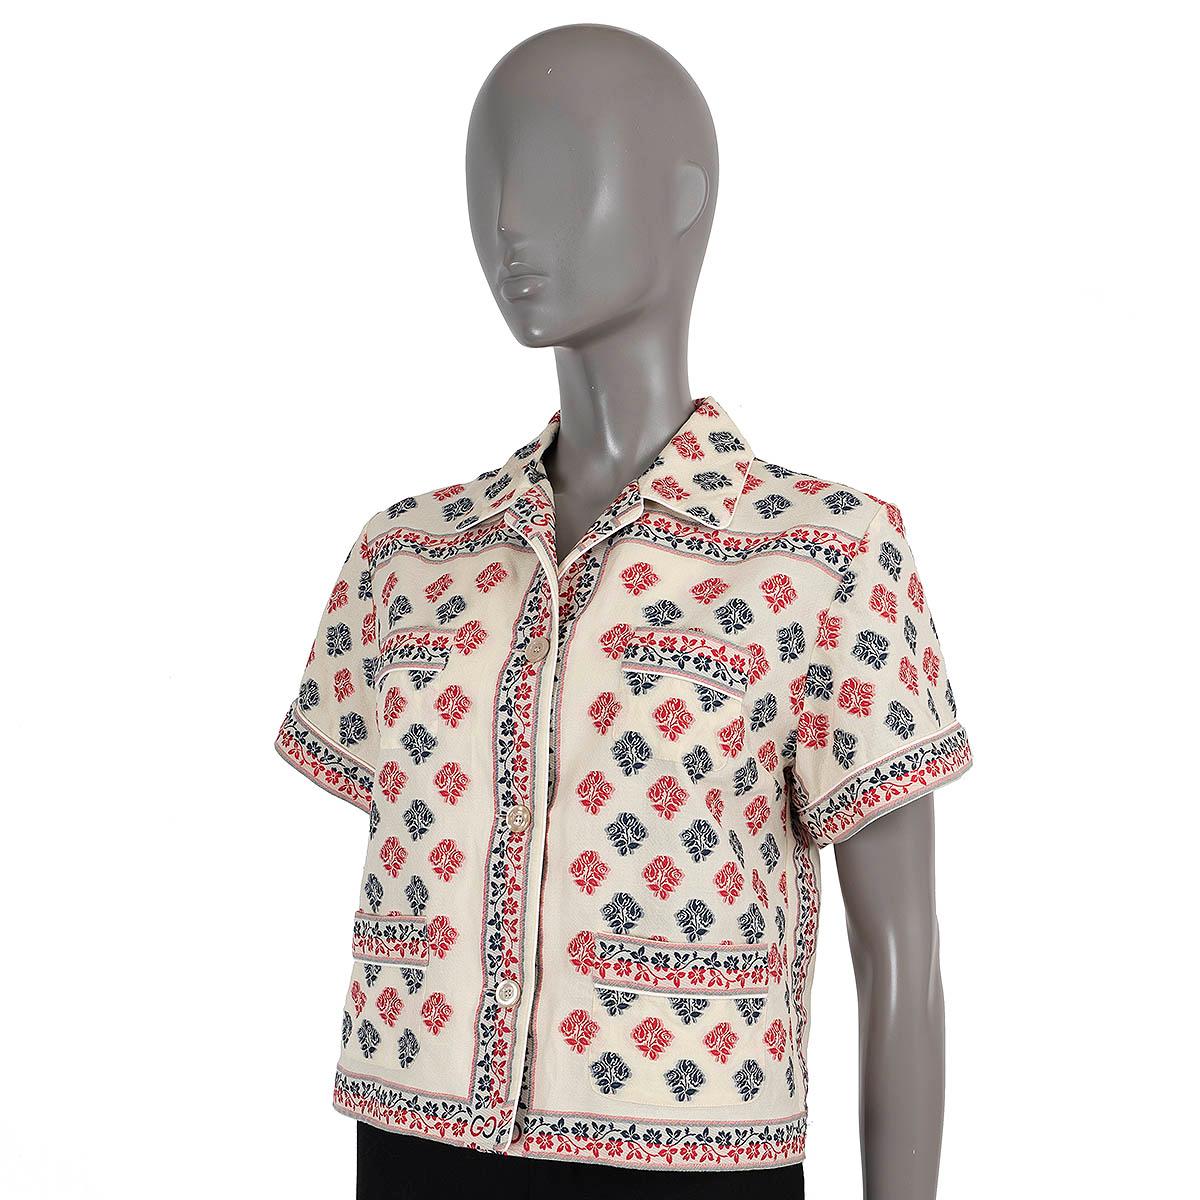 100% authentic Gucci floral jacquard shirt in ivory, pink and navy blue cotton (67%) and polyester (33%).  Features cuban collar, short sleeves, two pockets at the chest and waist. Closes with buttons on the front and is unlined. Has been worn and